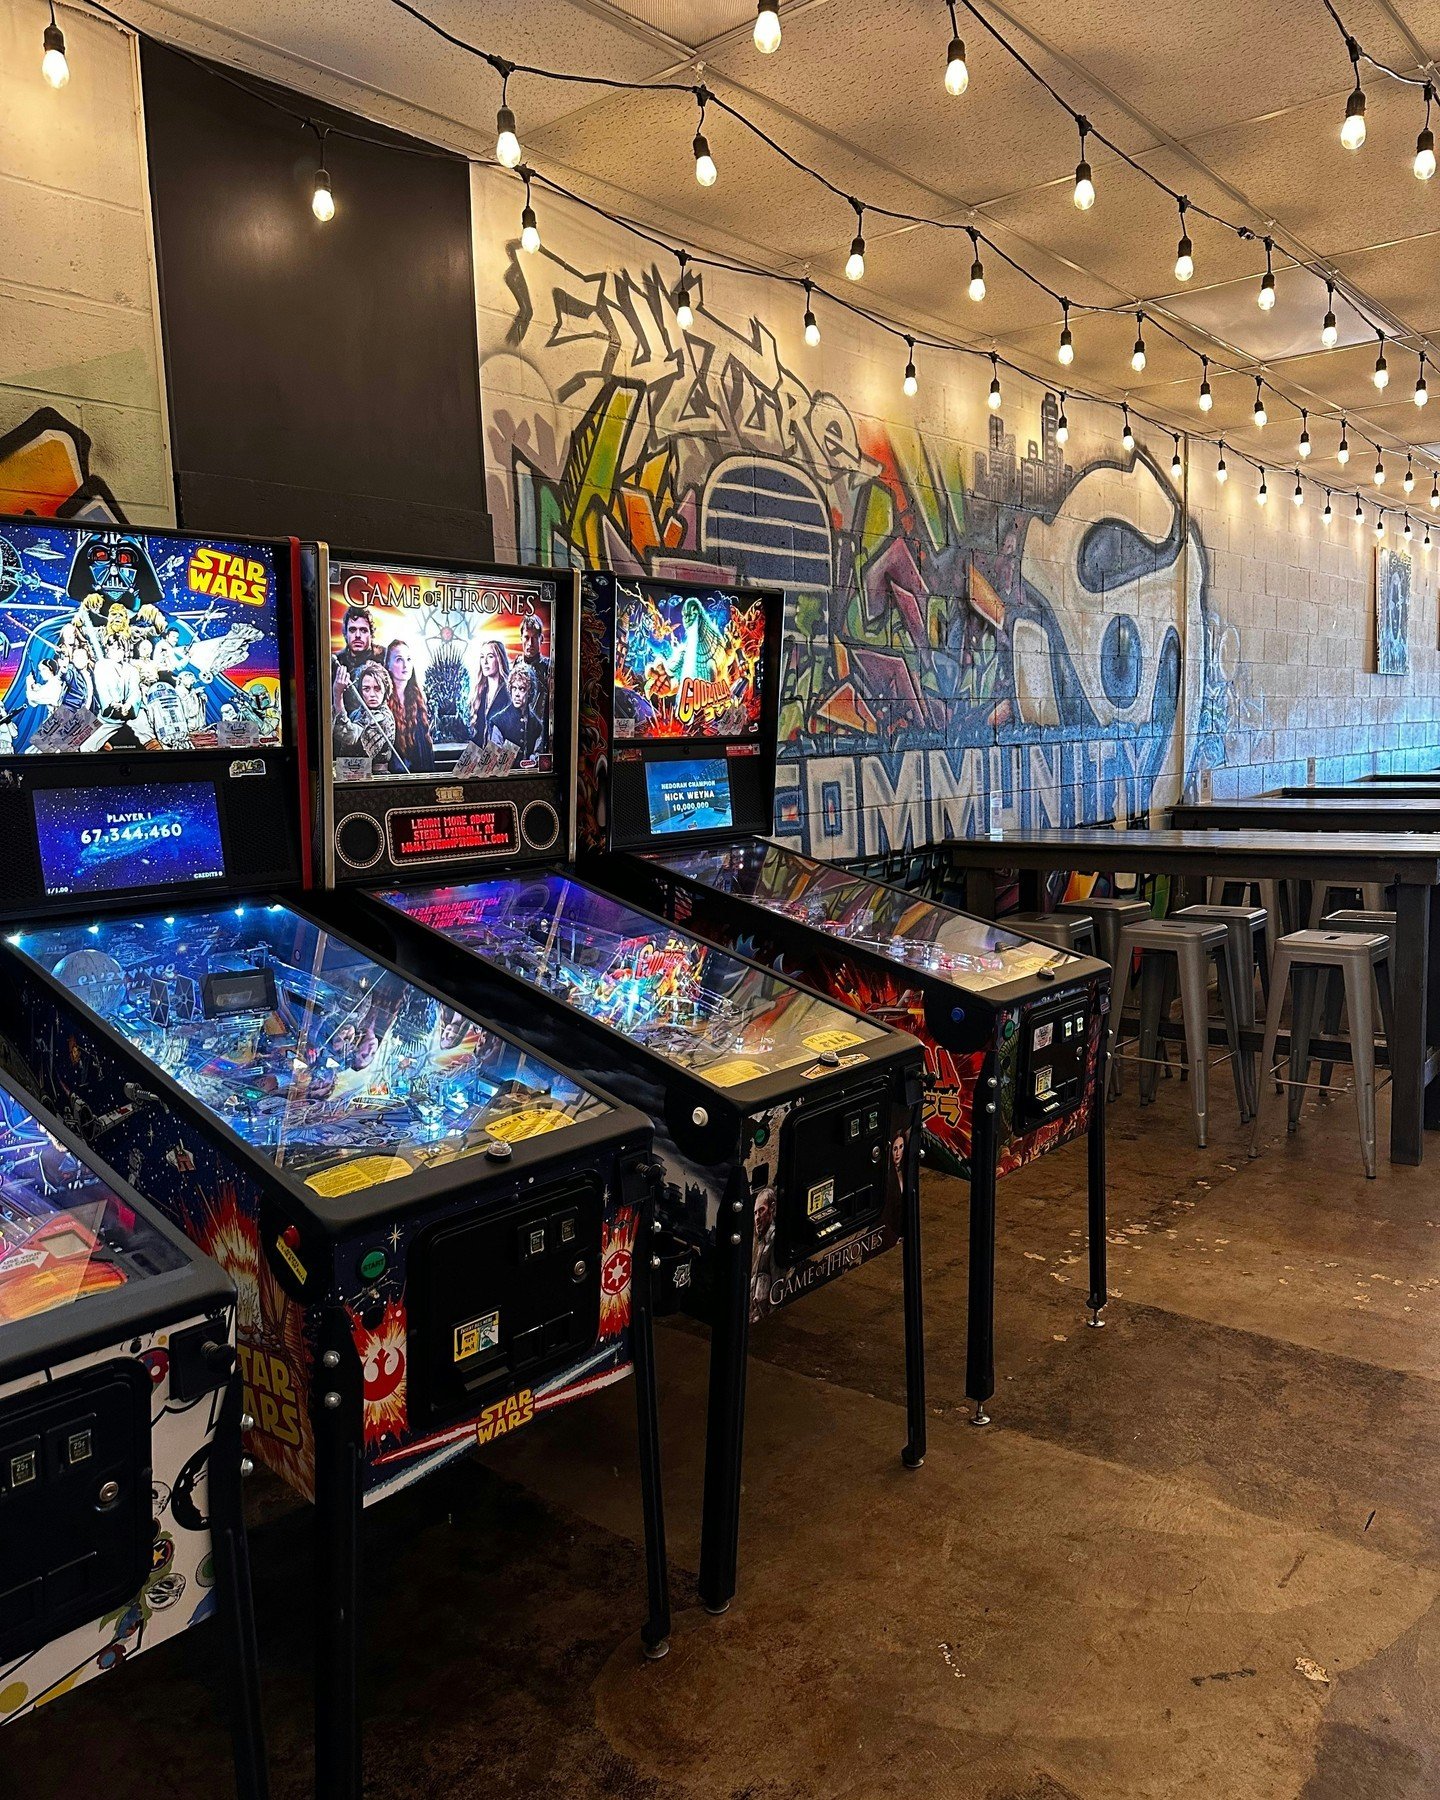 Come over and check out our awesome selection of board games and pinball machines! Whether you're looking to unwind with a cold beer after a long day at work or enjoy a fun family dinner, we've got you covered.

Open today until 6PM